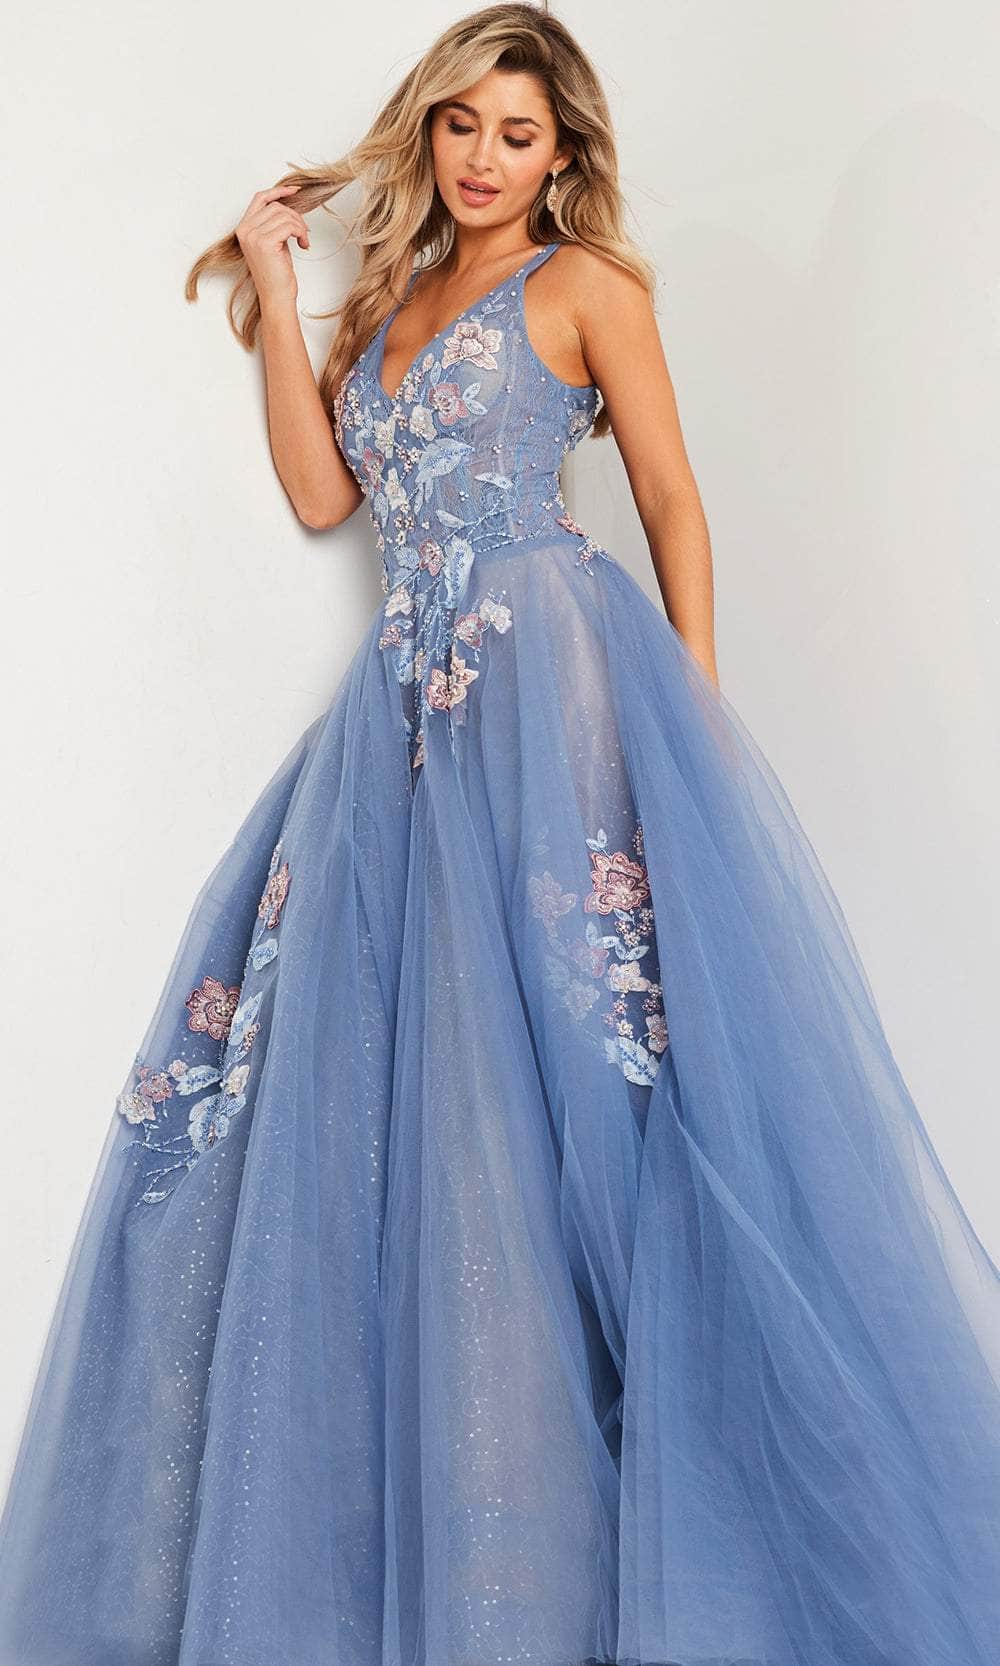 Image of Jovani 37468 - Floral Embroidered Ballgown